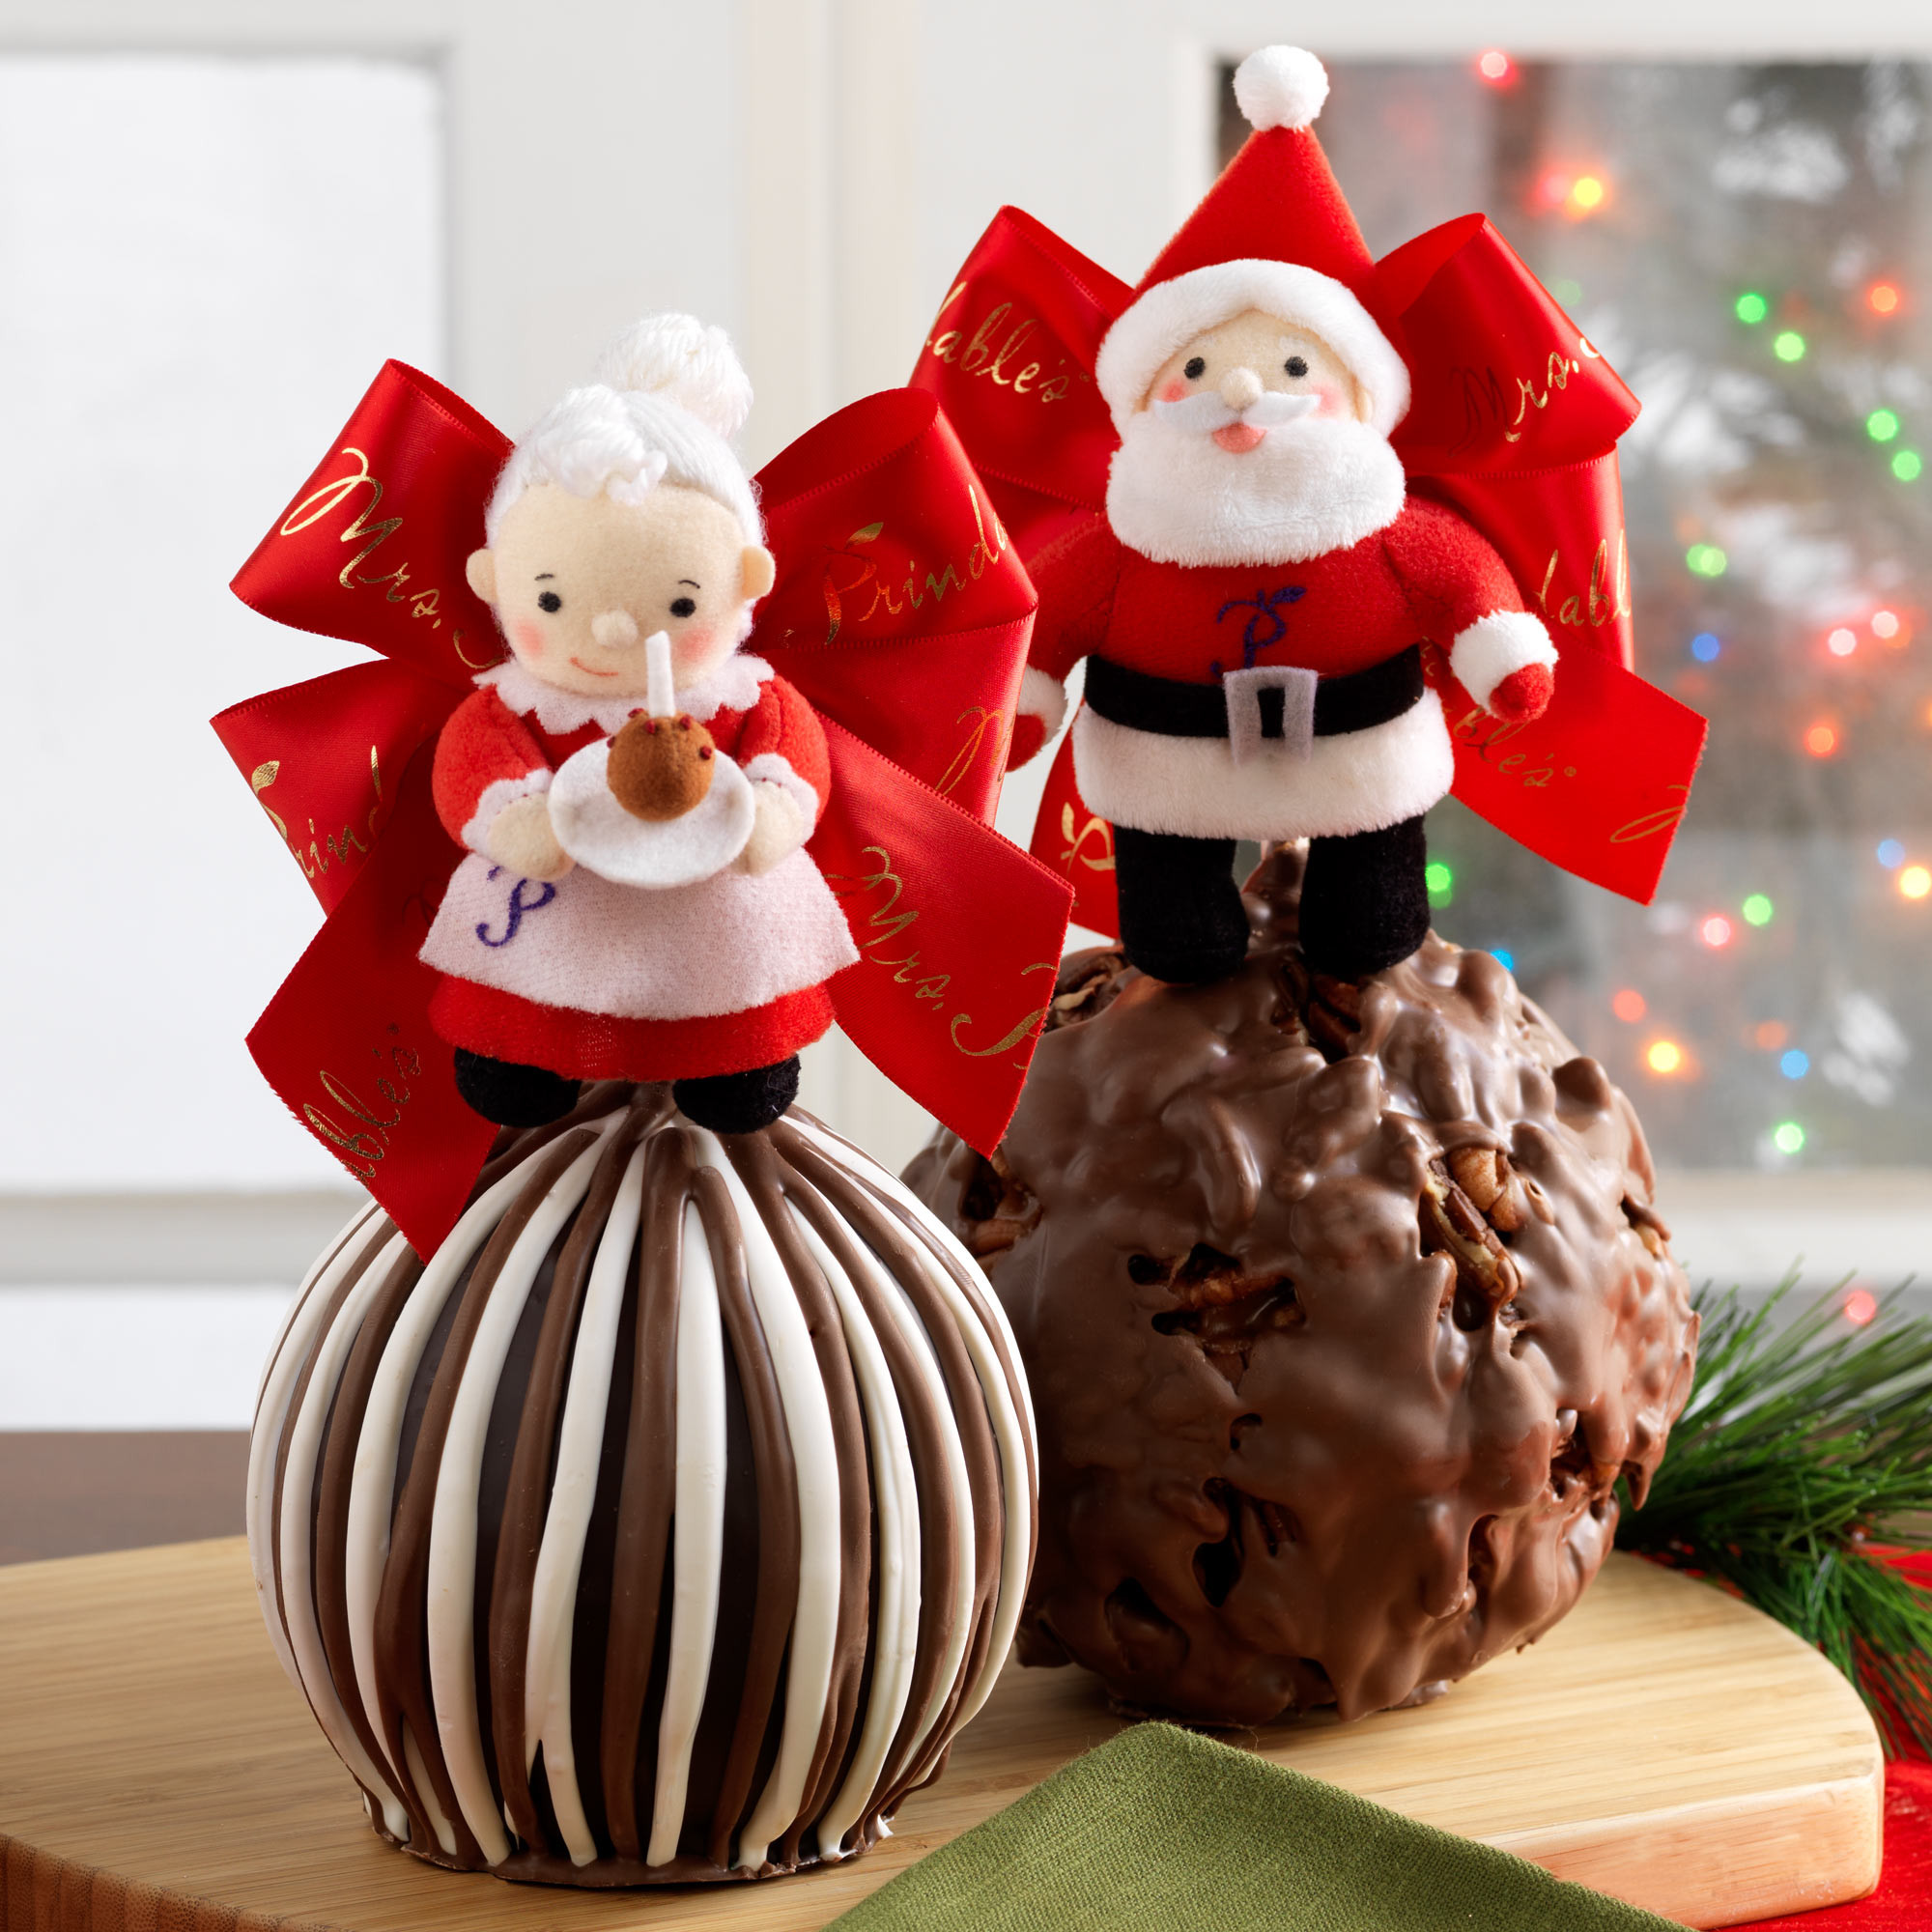 Gourmet Christmas Candy
 MrMrsClaus Mrs Prindables apples